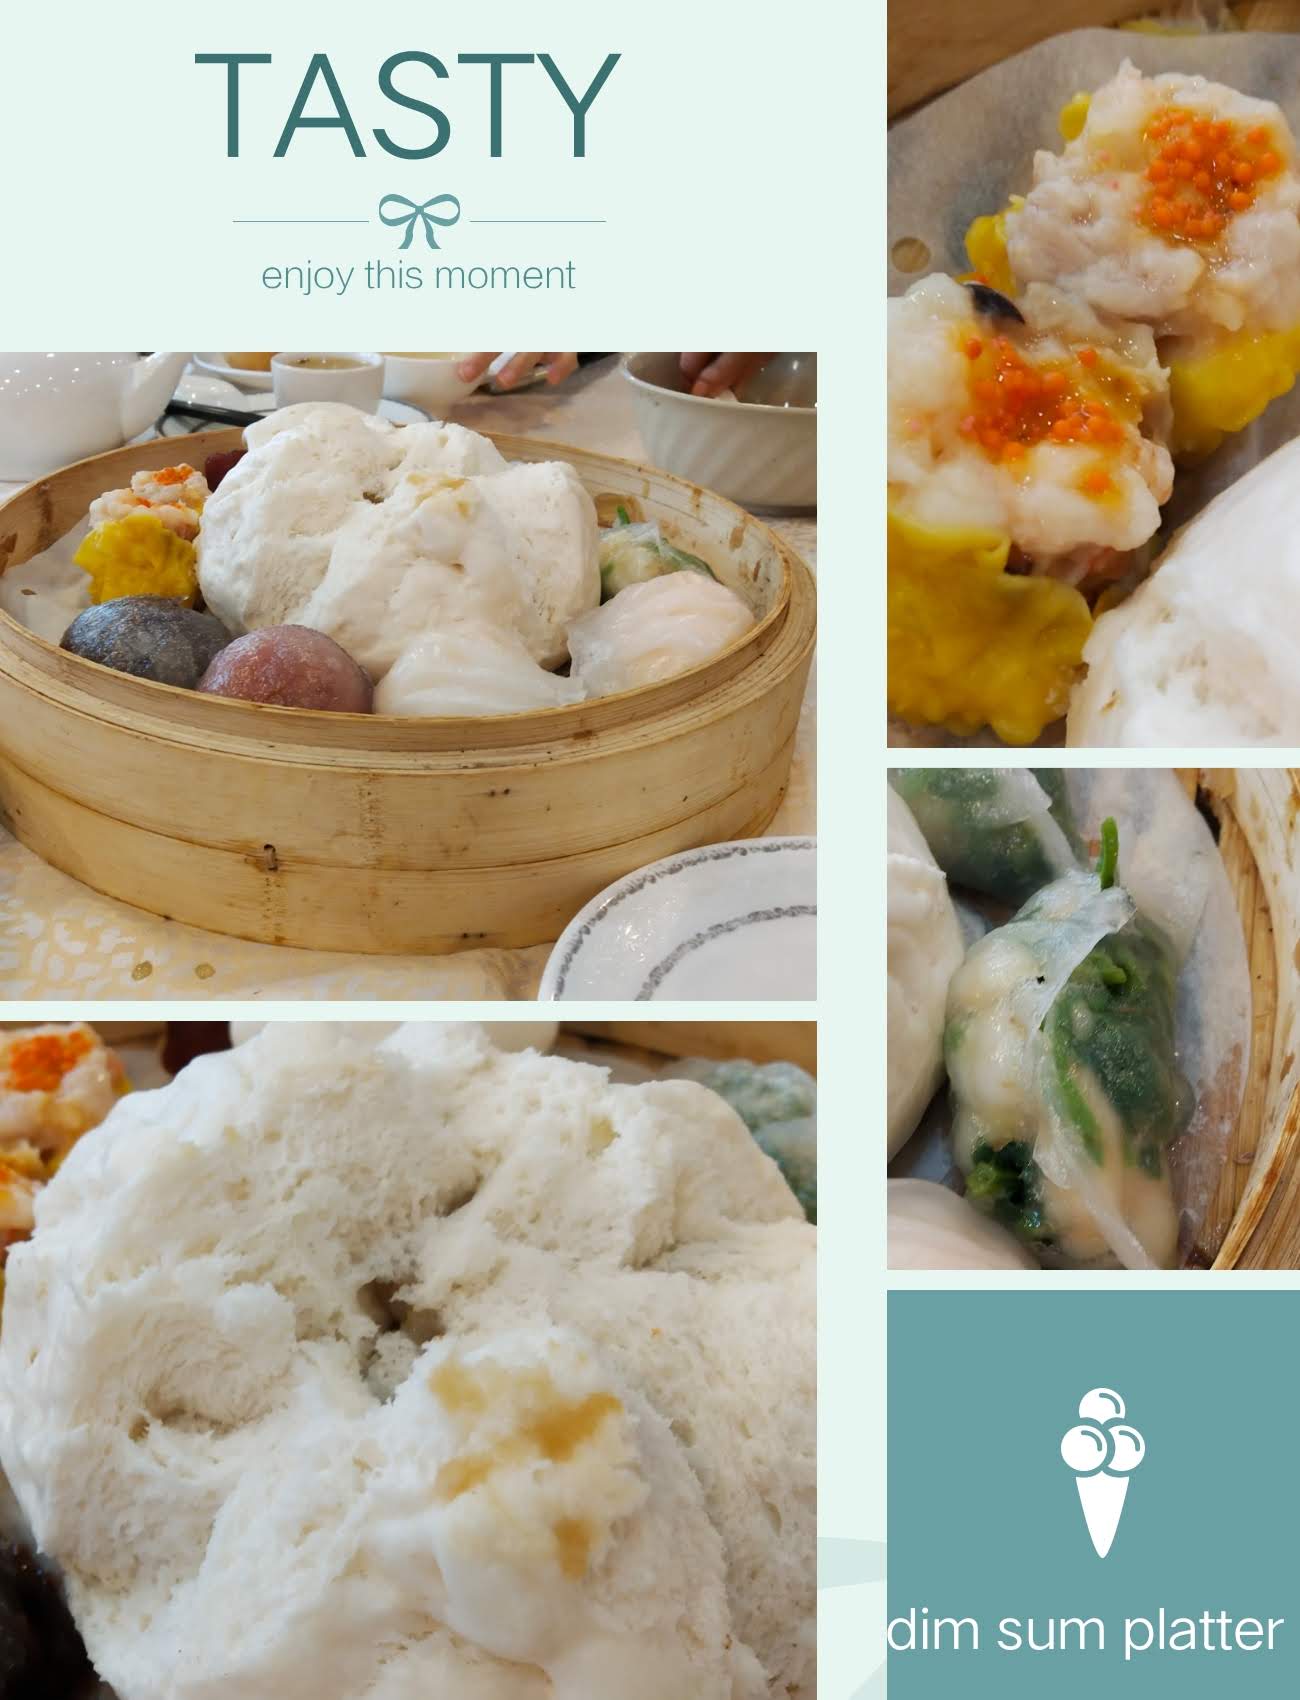 Share Frank’s post about the same benefit of dim sum platter and all inclusive private car tour 